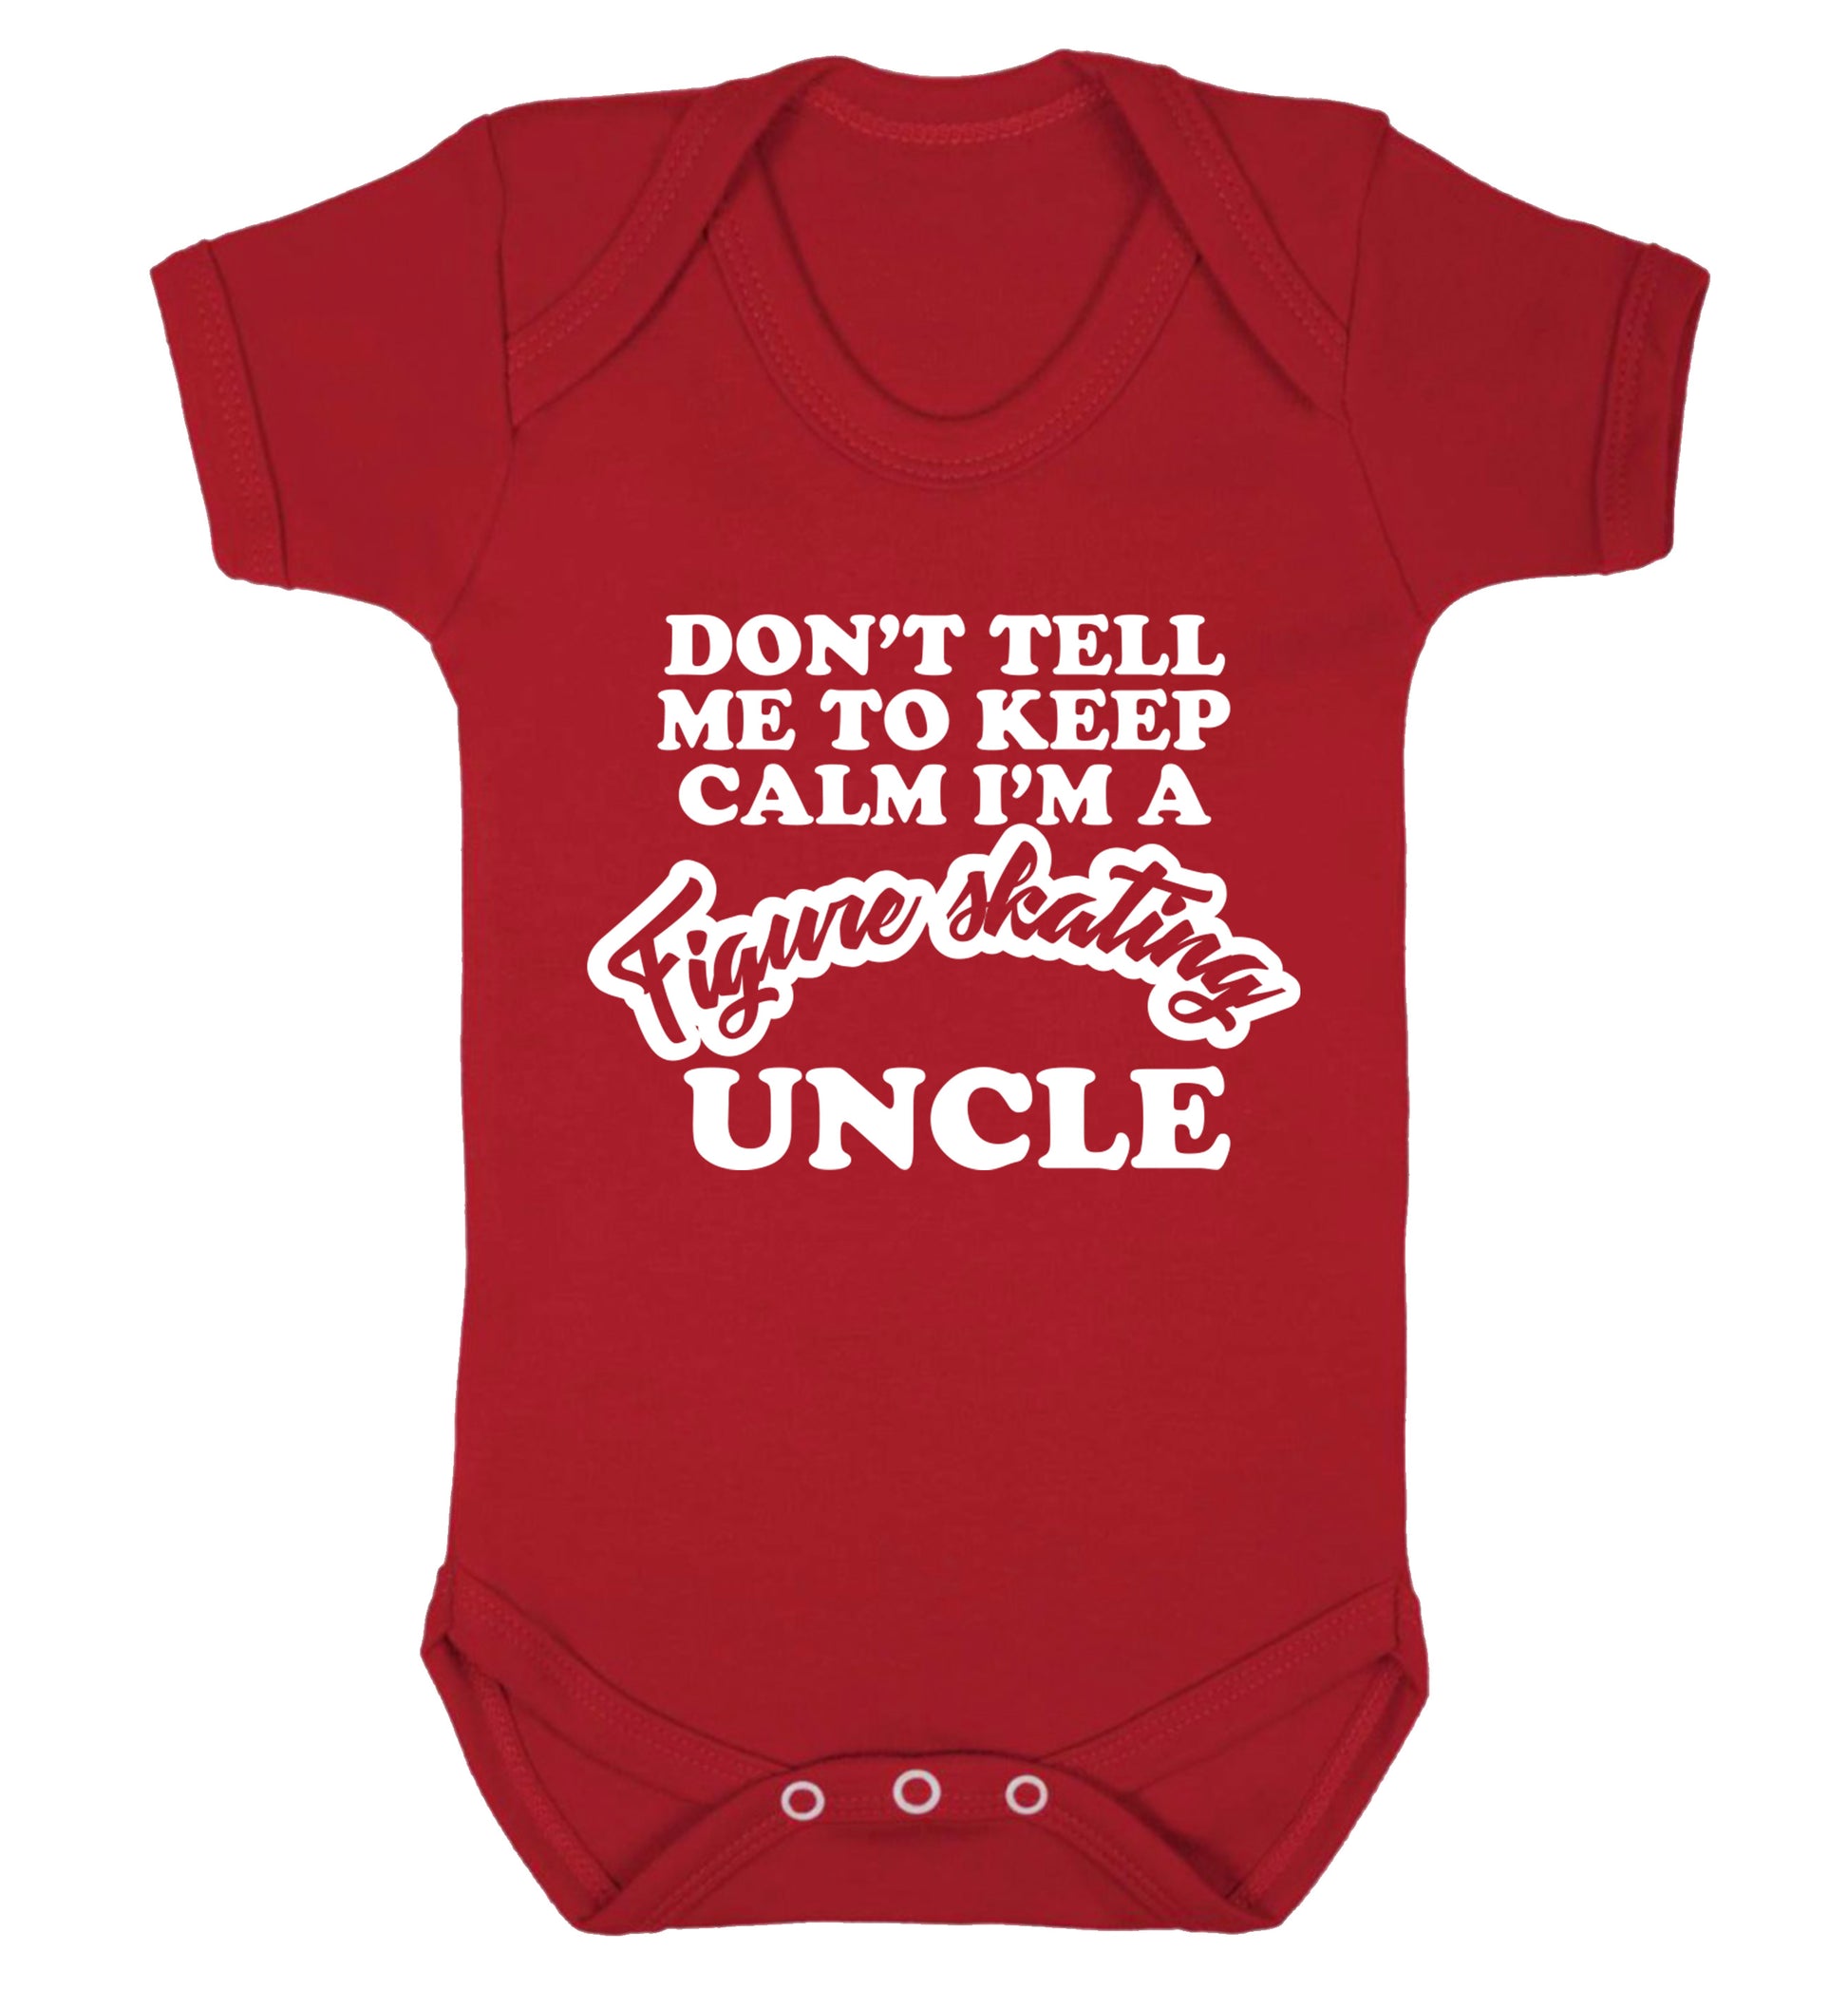 Don't tell me to keep calm I'm a figure skating uncle Baby Vest red 18-24 months